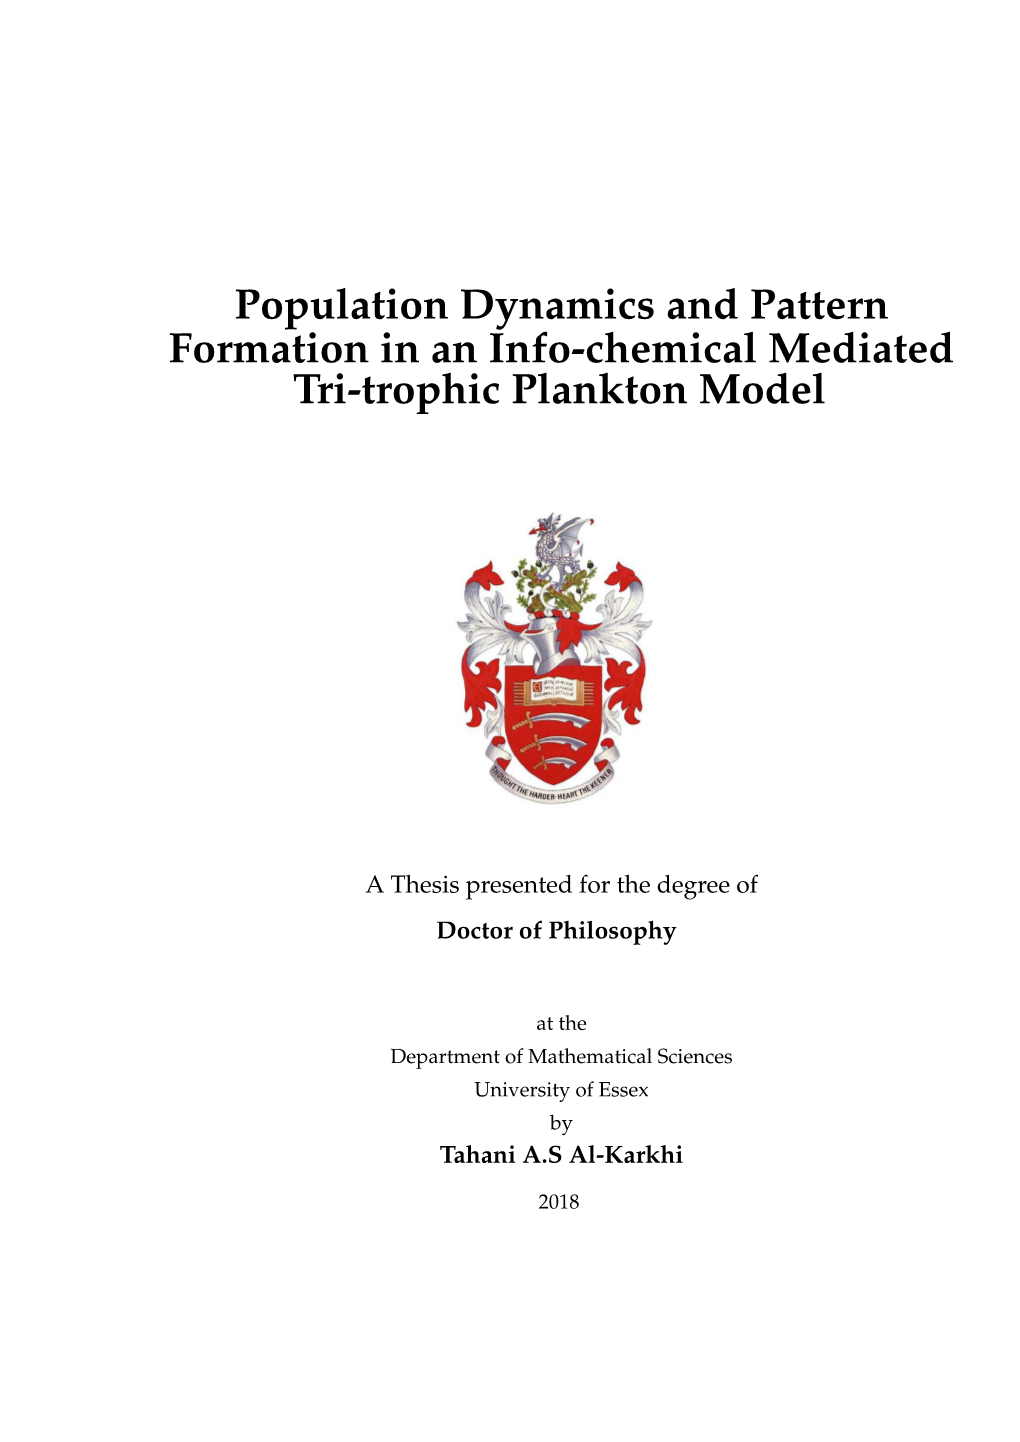 Population Dynamics and Pattern Formation in an Info-Chemical Mediated Tri-Trophic Plankton Model